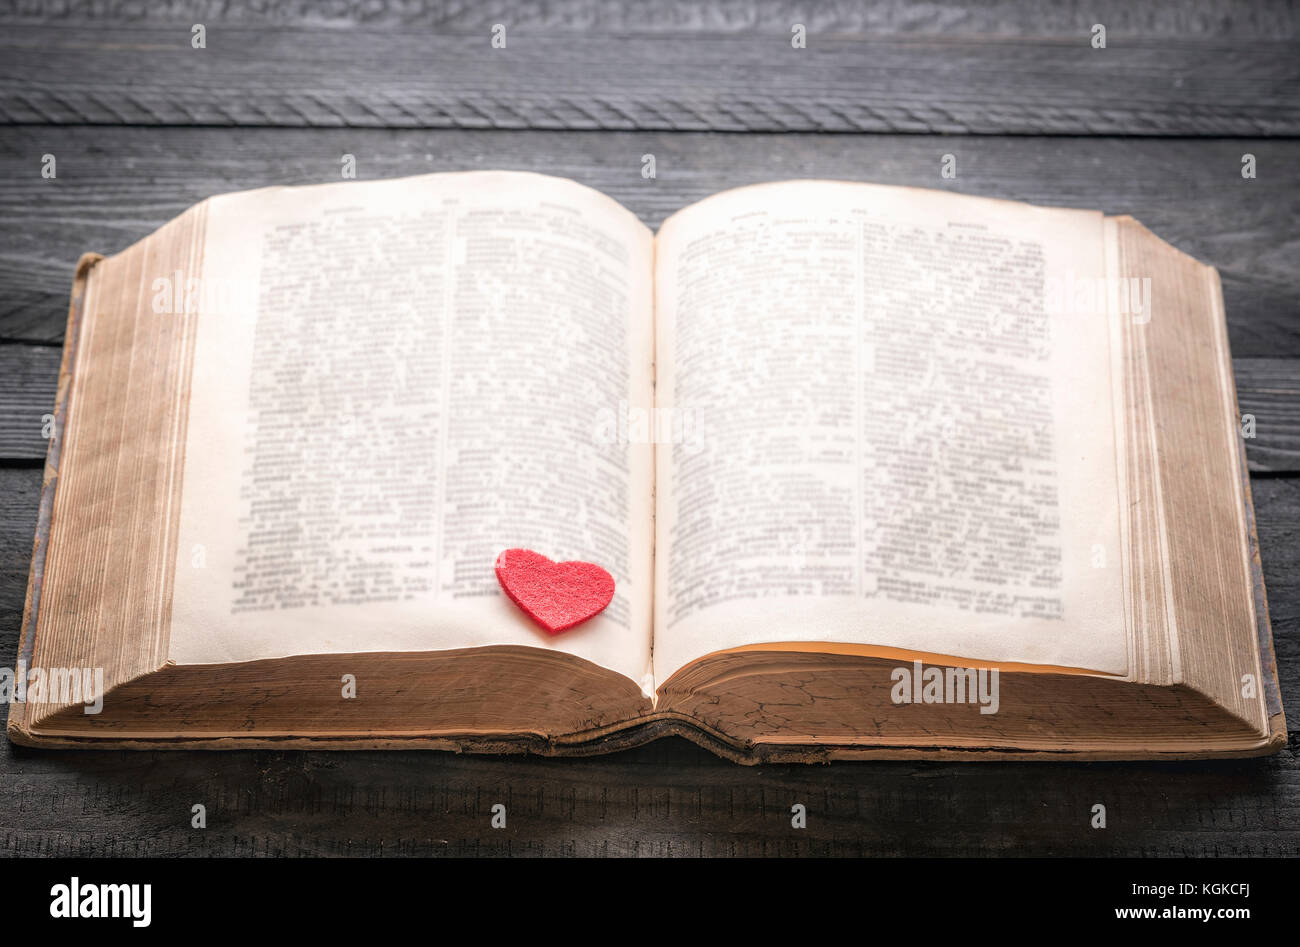 Open old book with a red little heart on its pages, displayed on a black wooden table. Concept for love of reading, education or romantic novel. Stock Photo